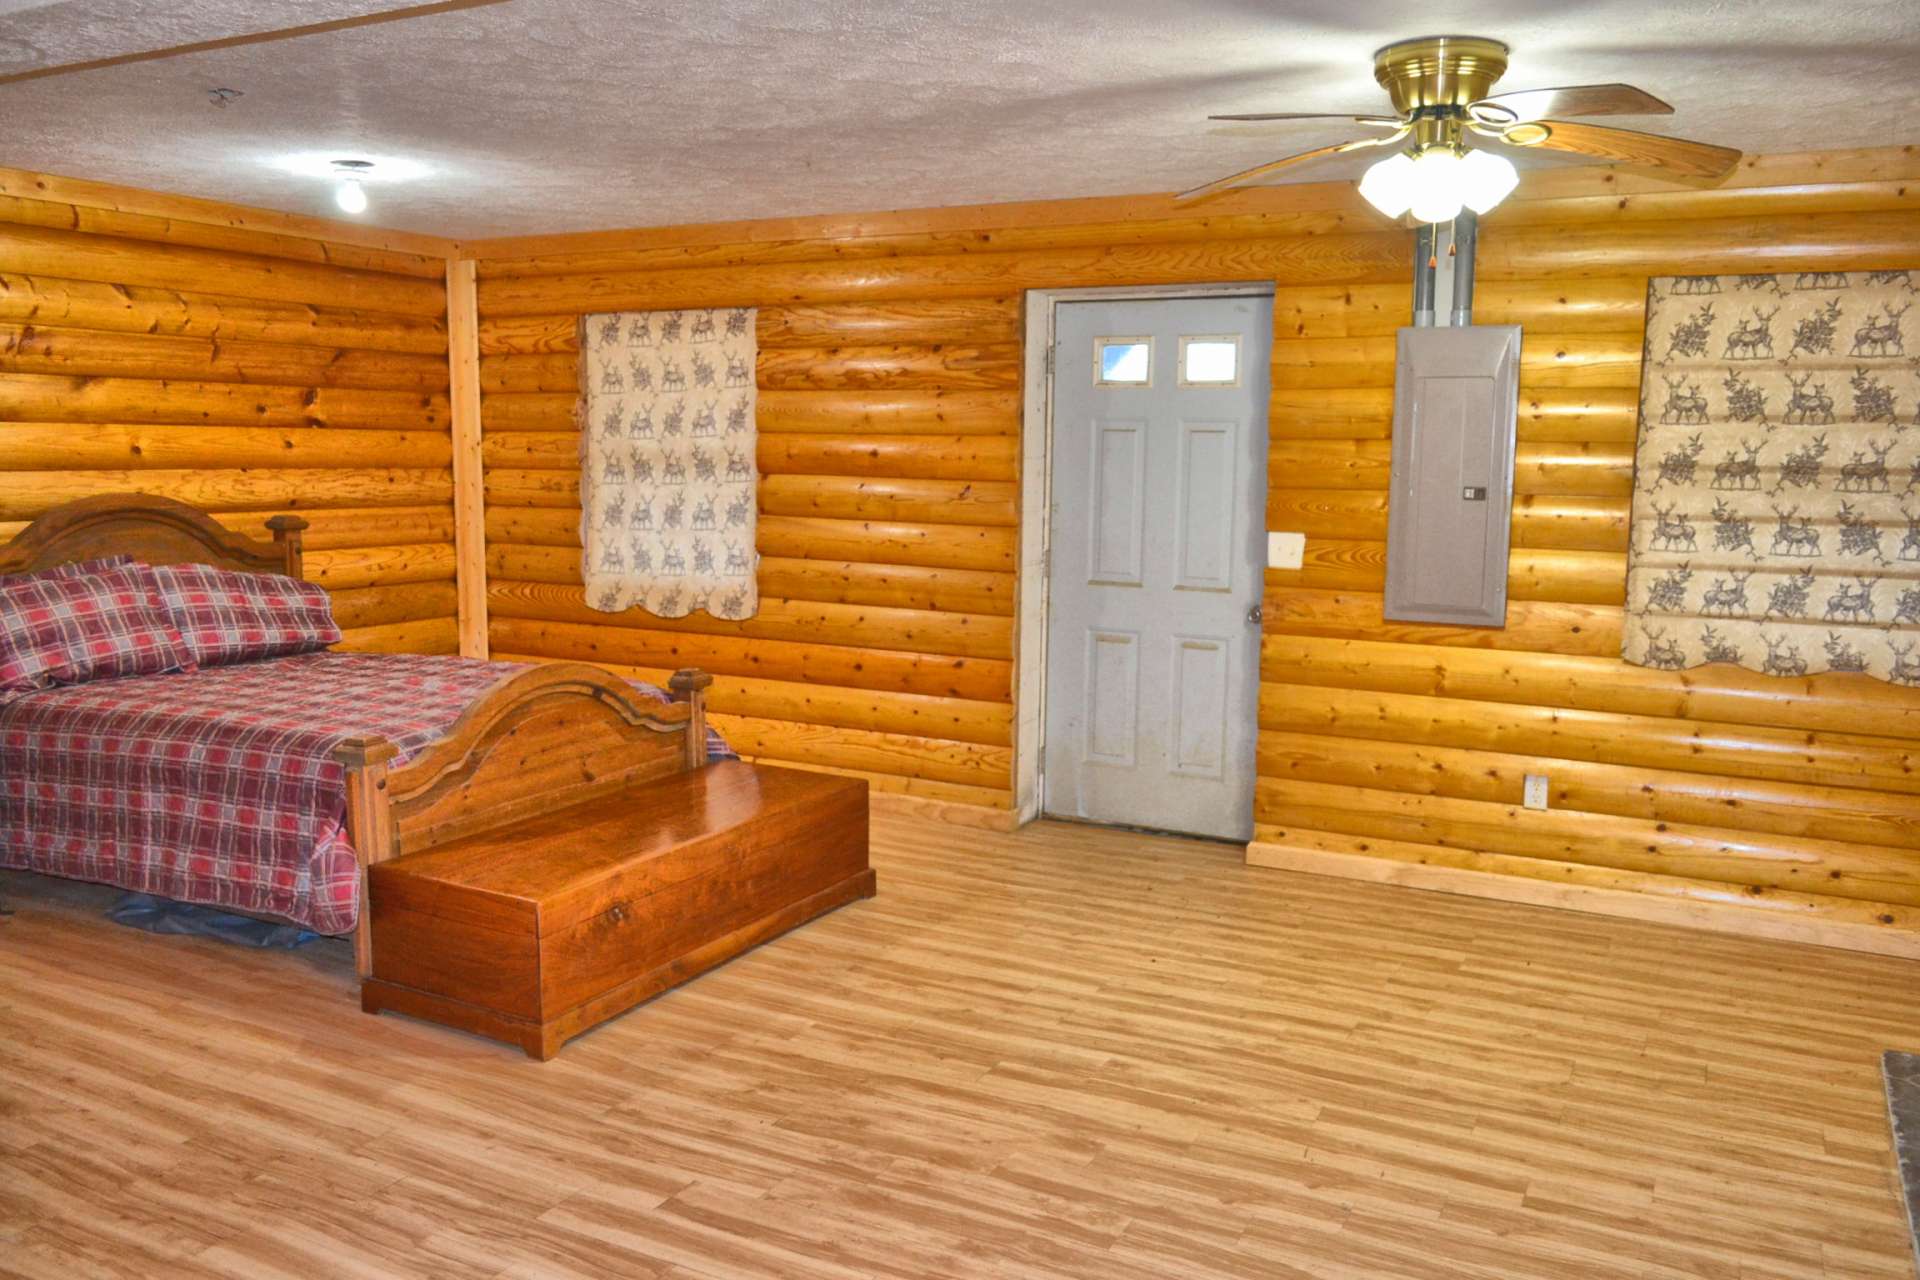 This level features a full bath with laundry area and access to the lower patio.